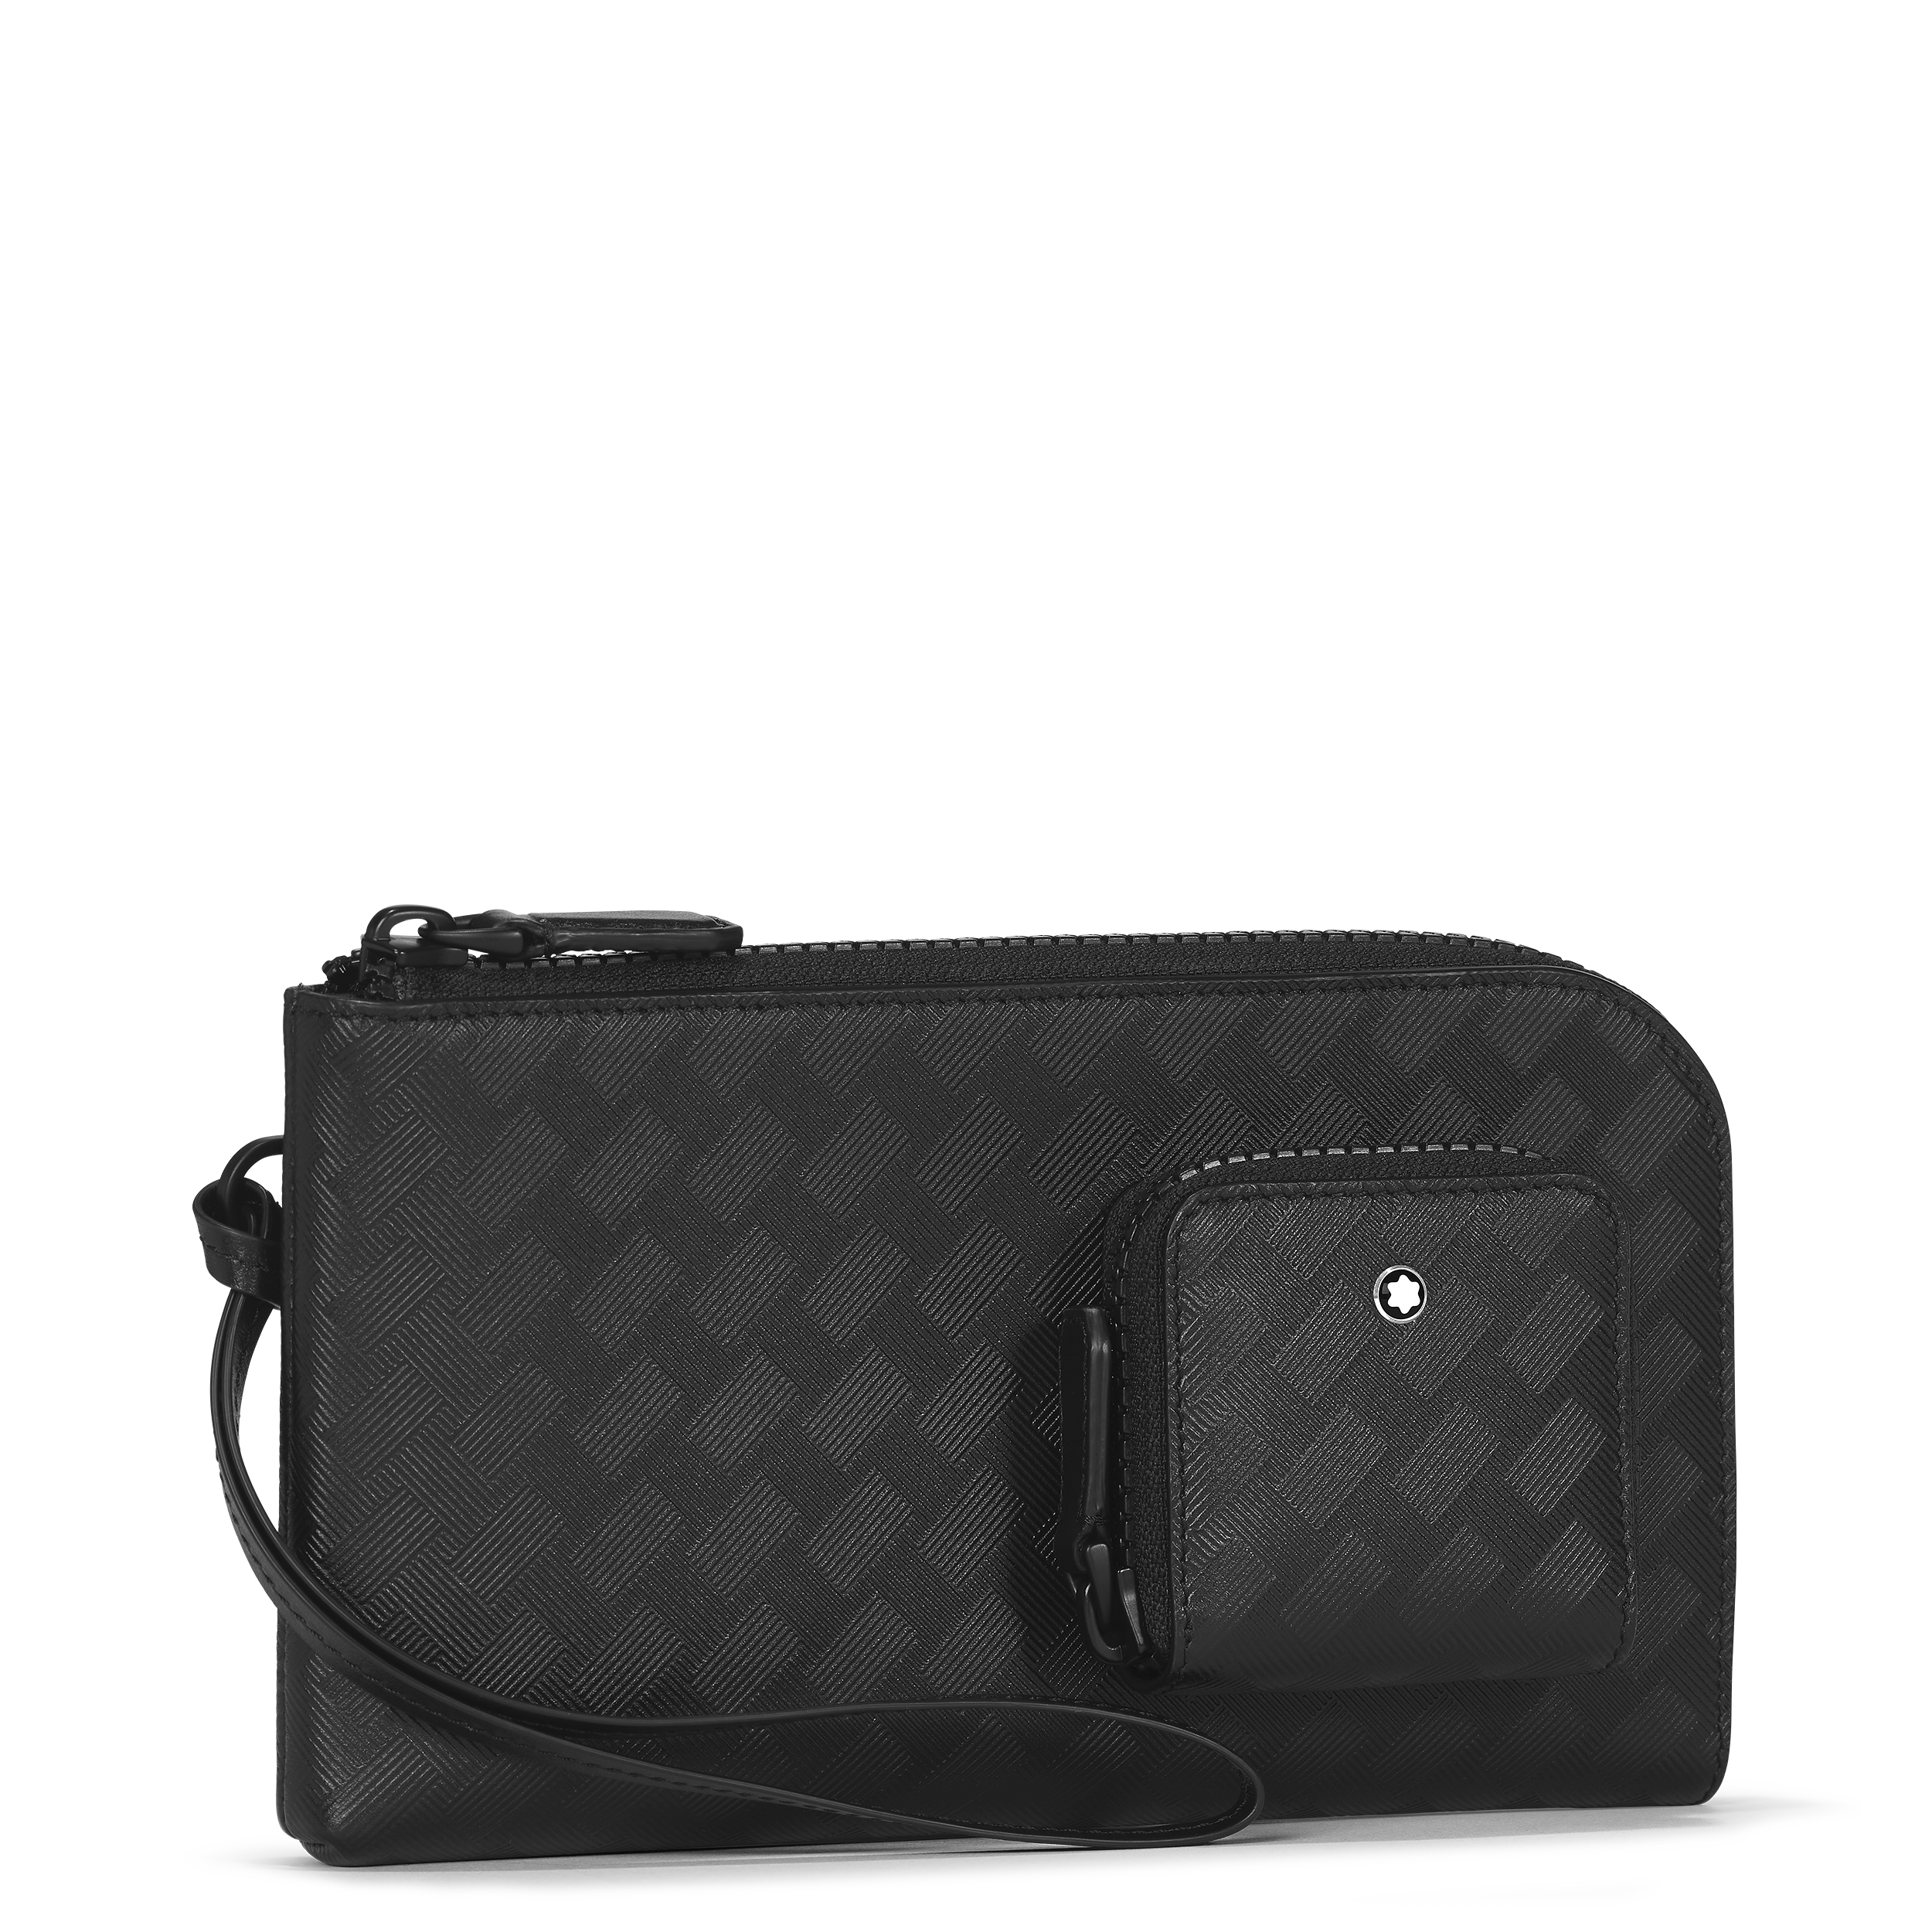 Montblanc Extreme 3.0 wallet 6cc with pocket, image 5